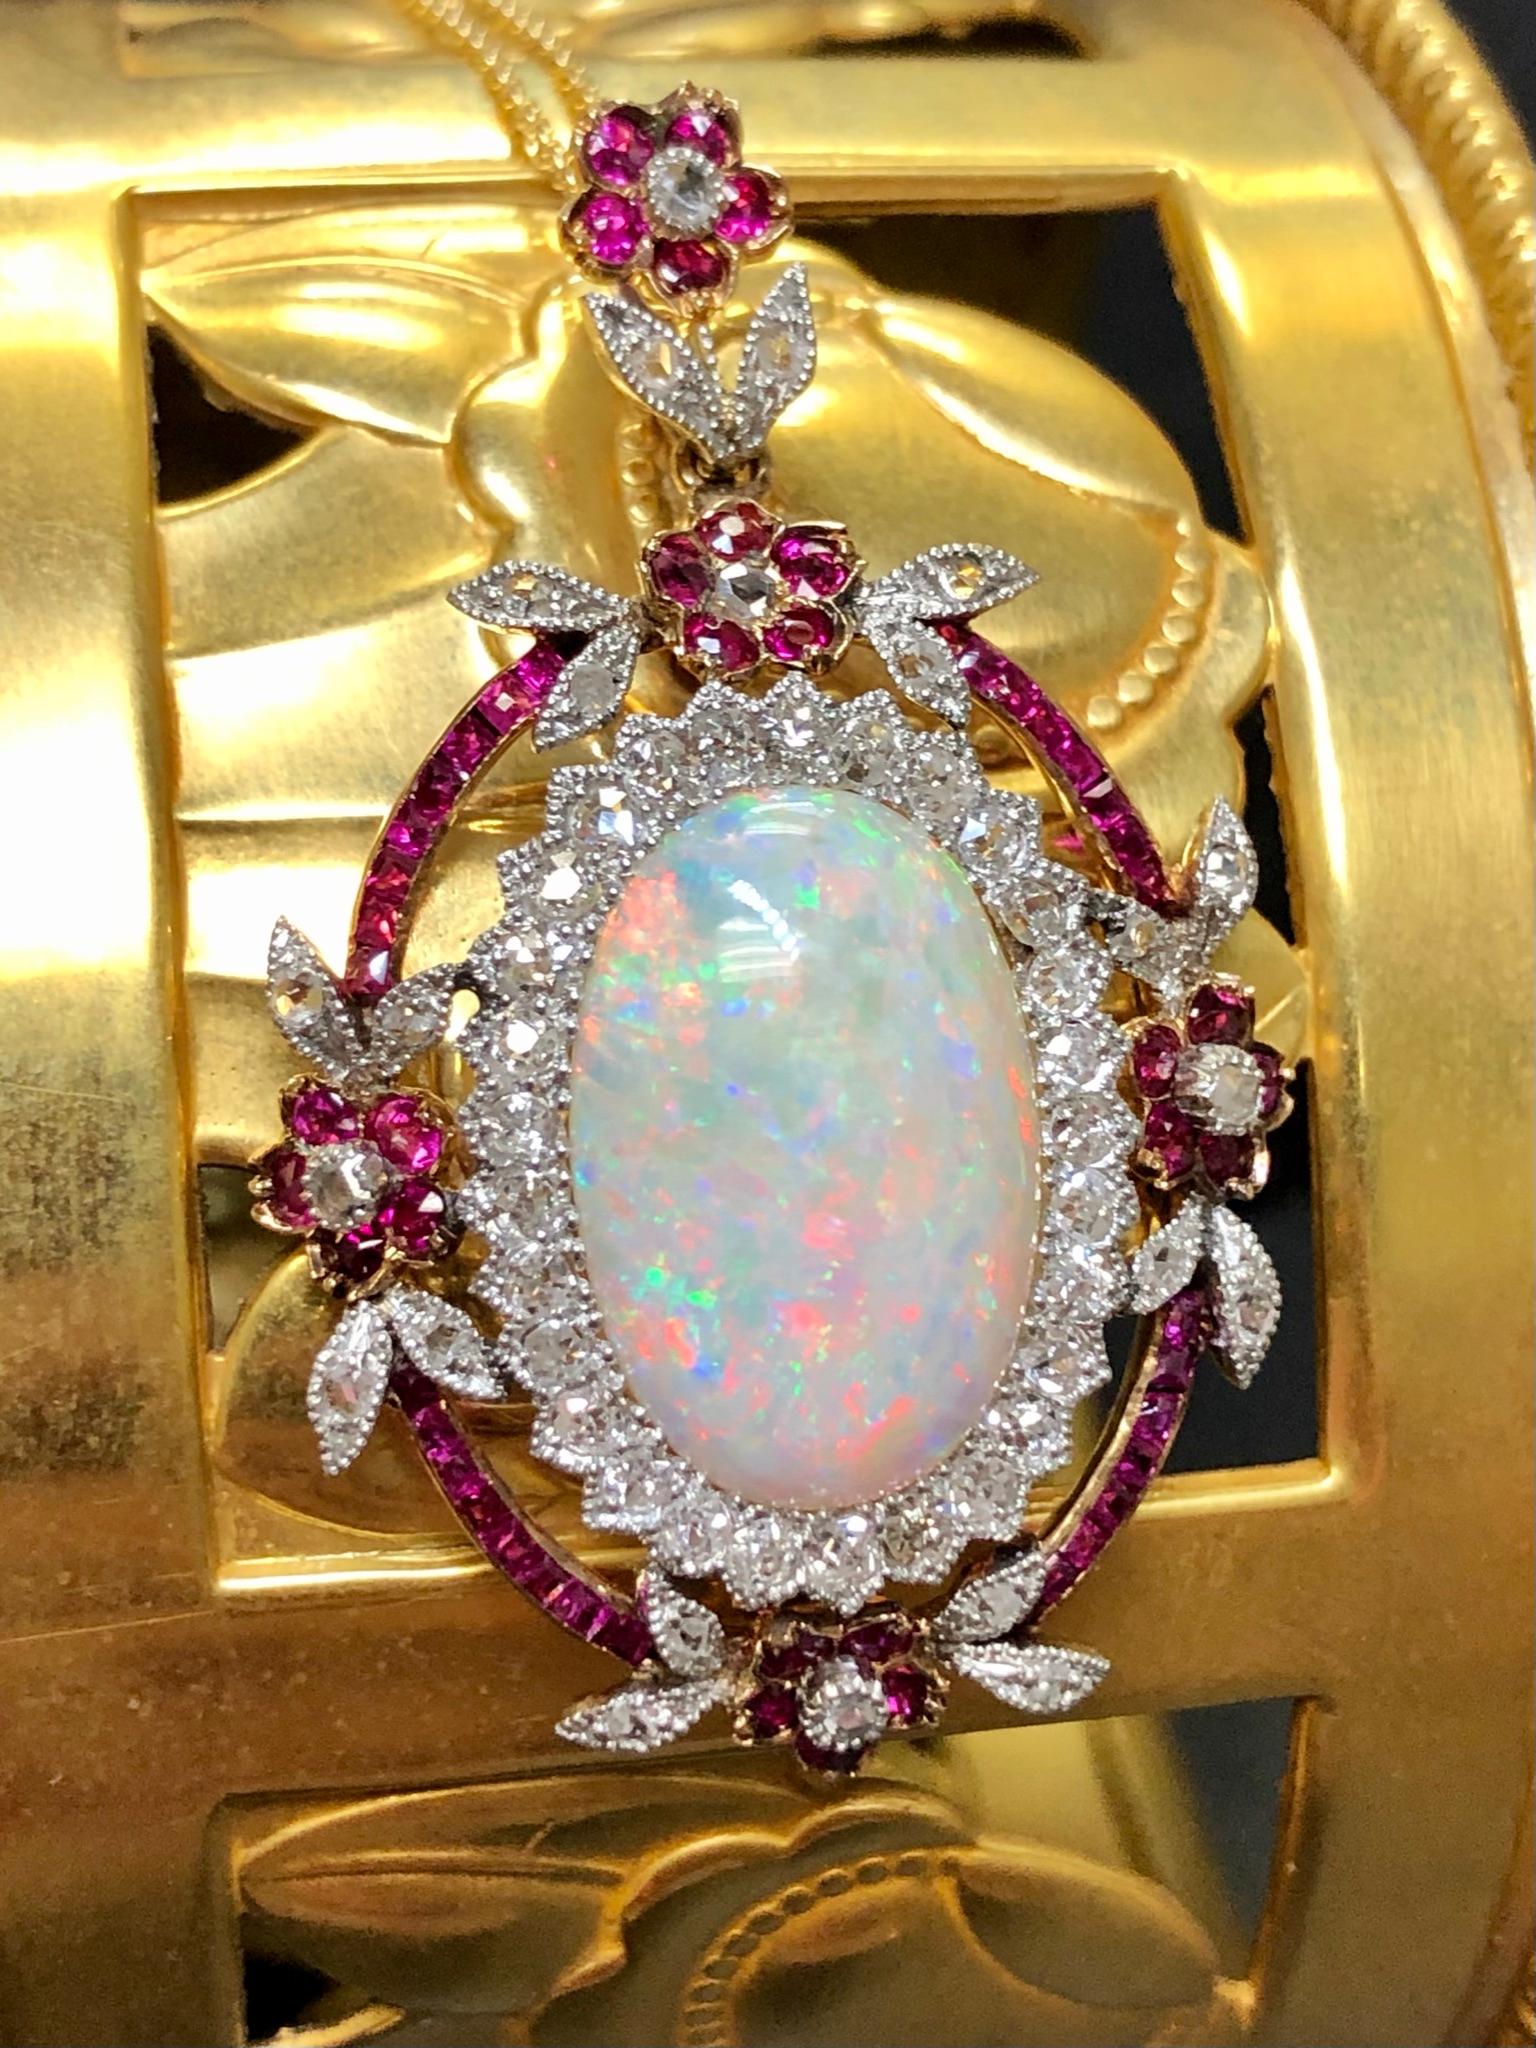 
An incredible example of the Edwardian period, this beautiful pendant is done in 14K gold and centered by an approximately 6.70ct (17.2mm x 11.13mm x 4.83mm) natural Australian opal which is also 100% free of crazing. Surrounding the center stone,